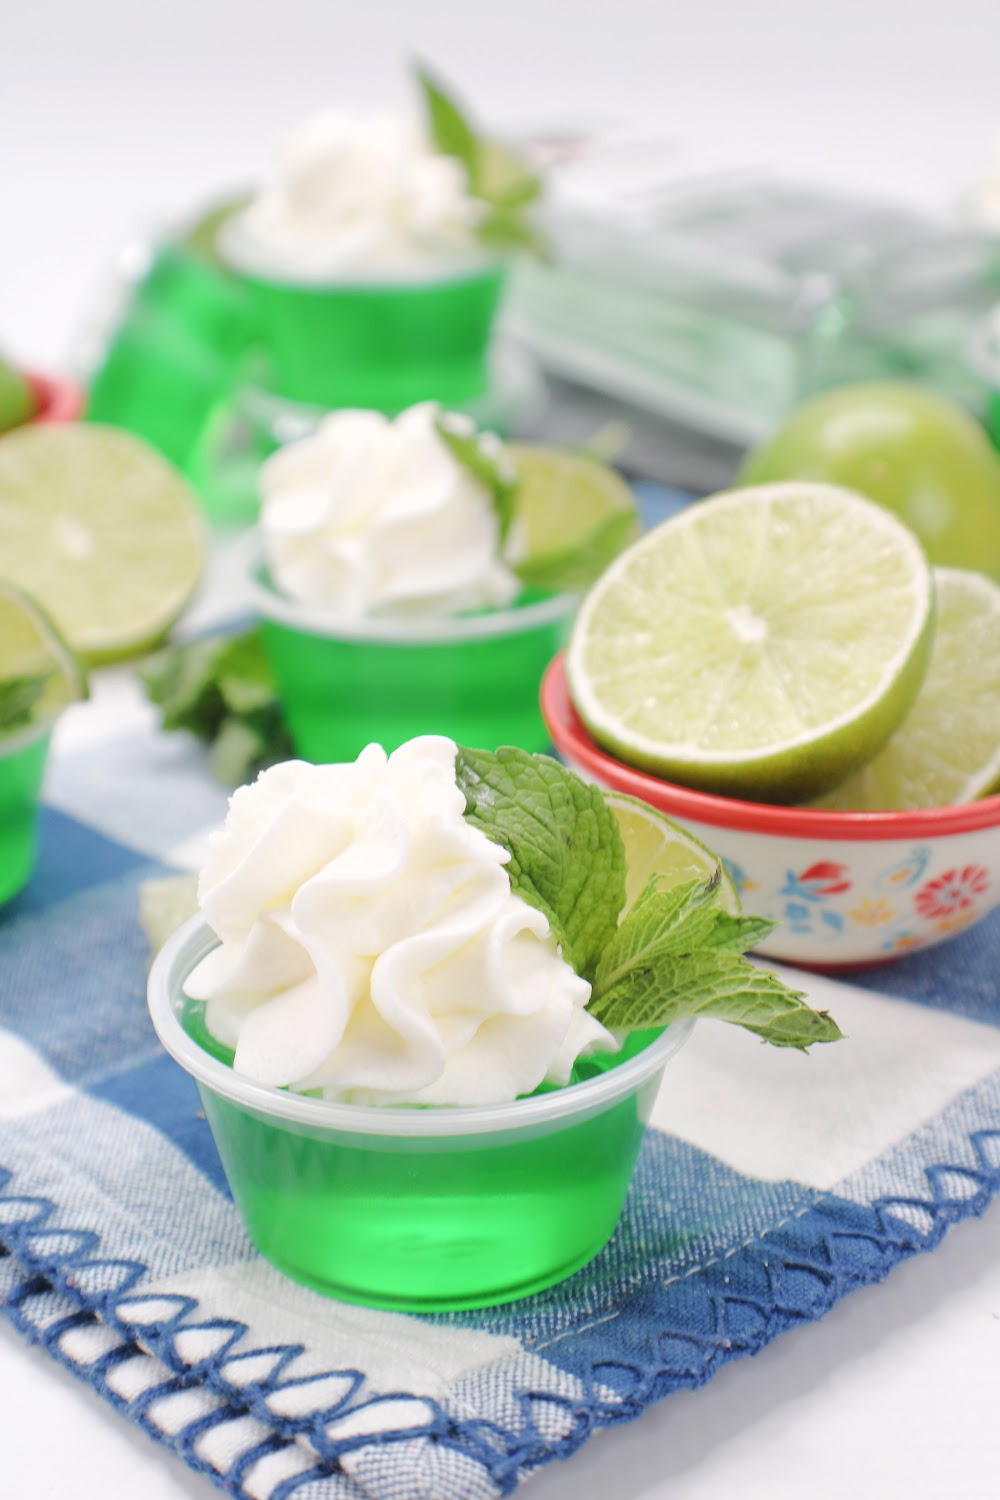 Mojito Jello Shots made with lime Jell-O and light rum. Garnished with whipped cream, a lime wedge and mint. These mojito jello shots are sitting on a blue and white checked cloth napkin with a bowl of sliced limes on the side.